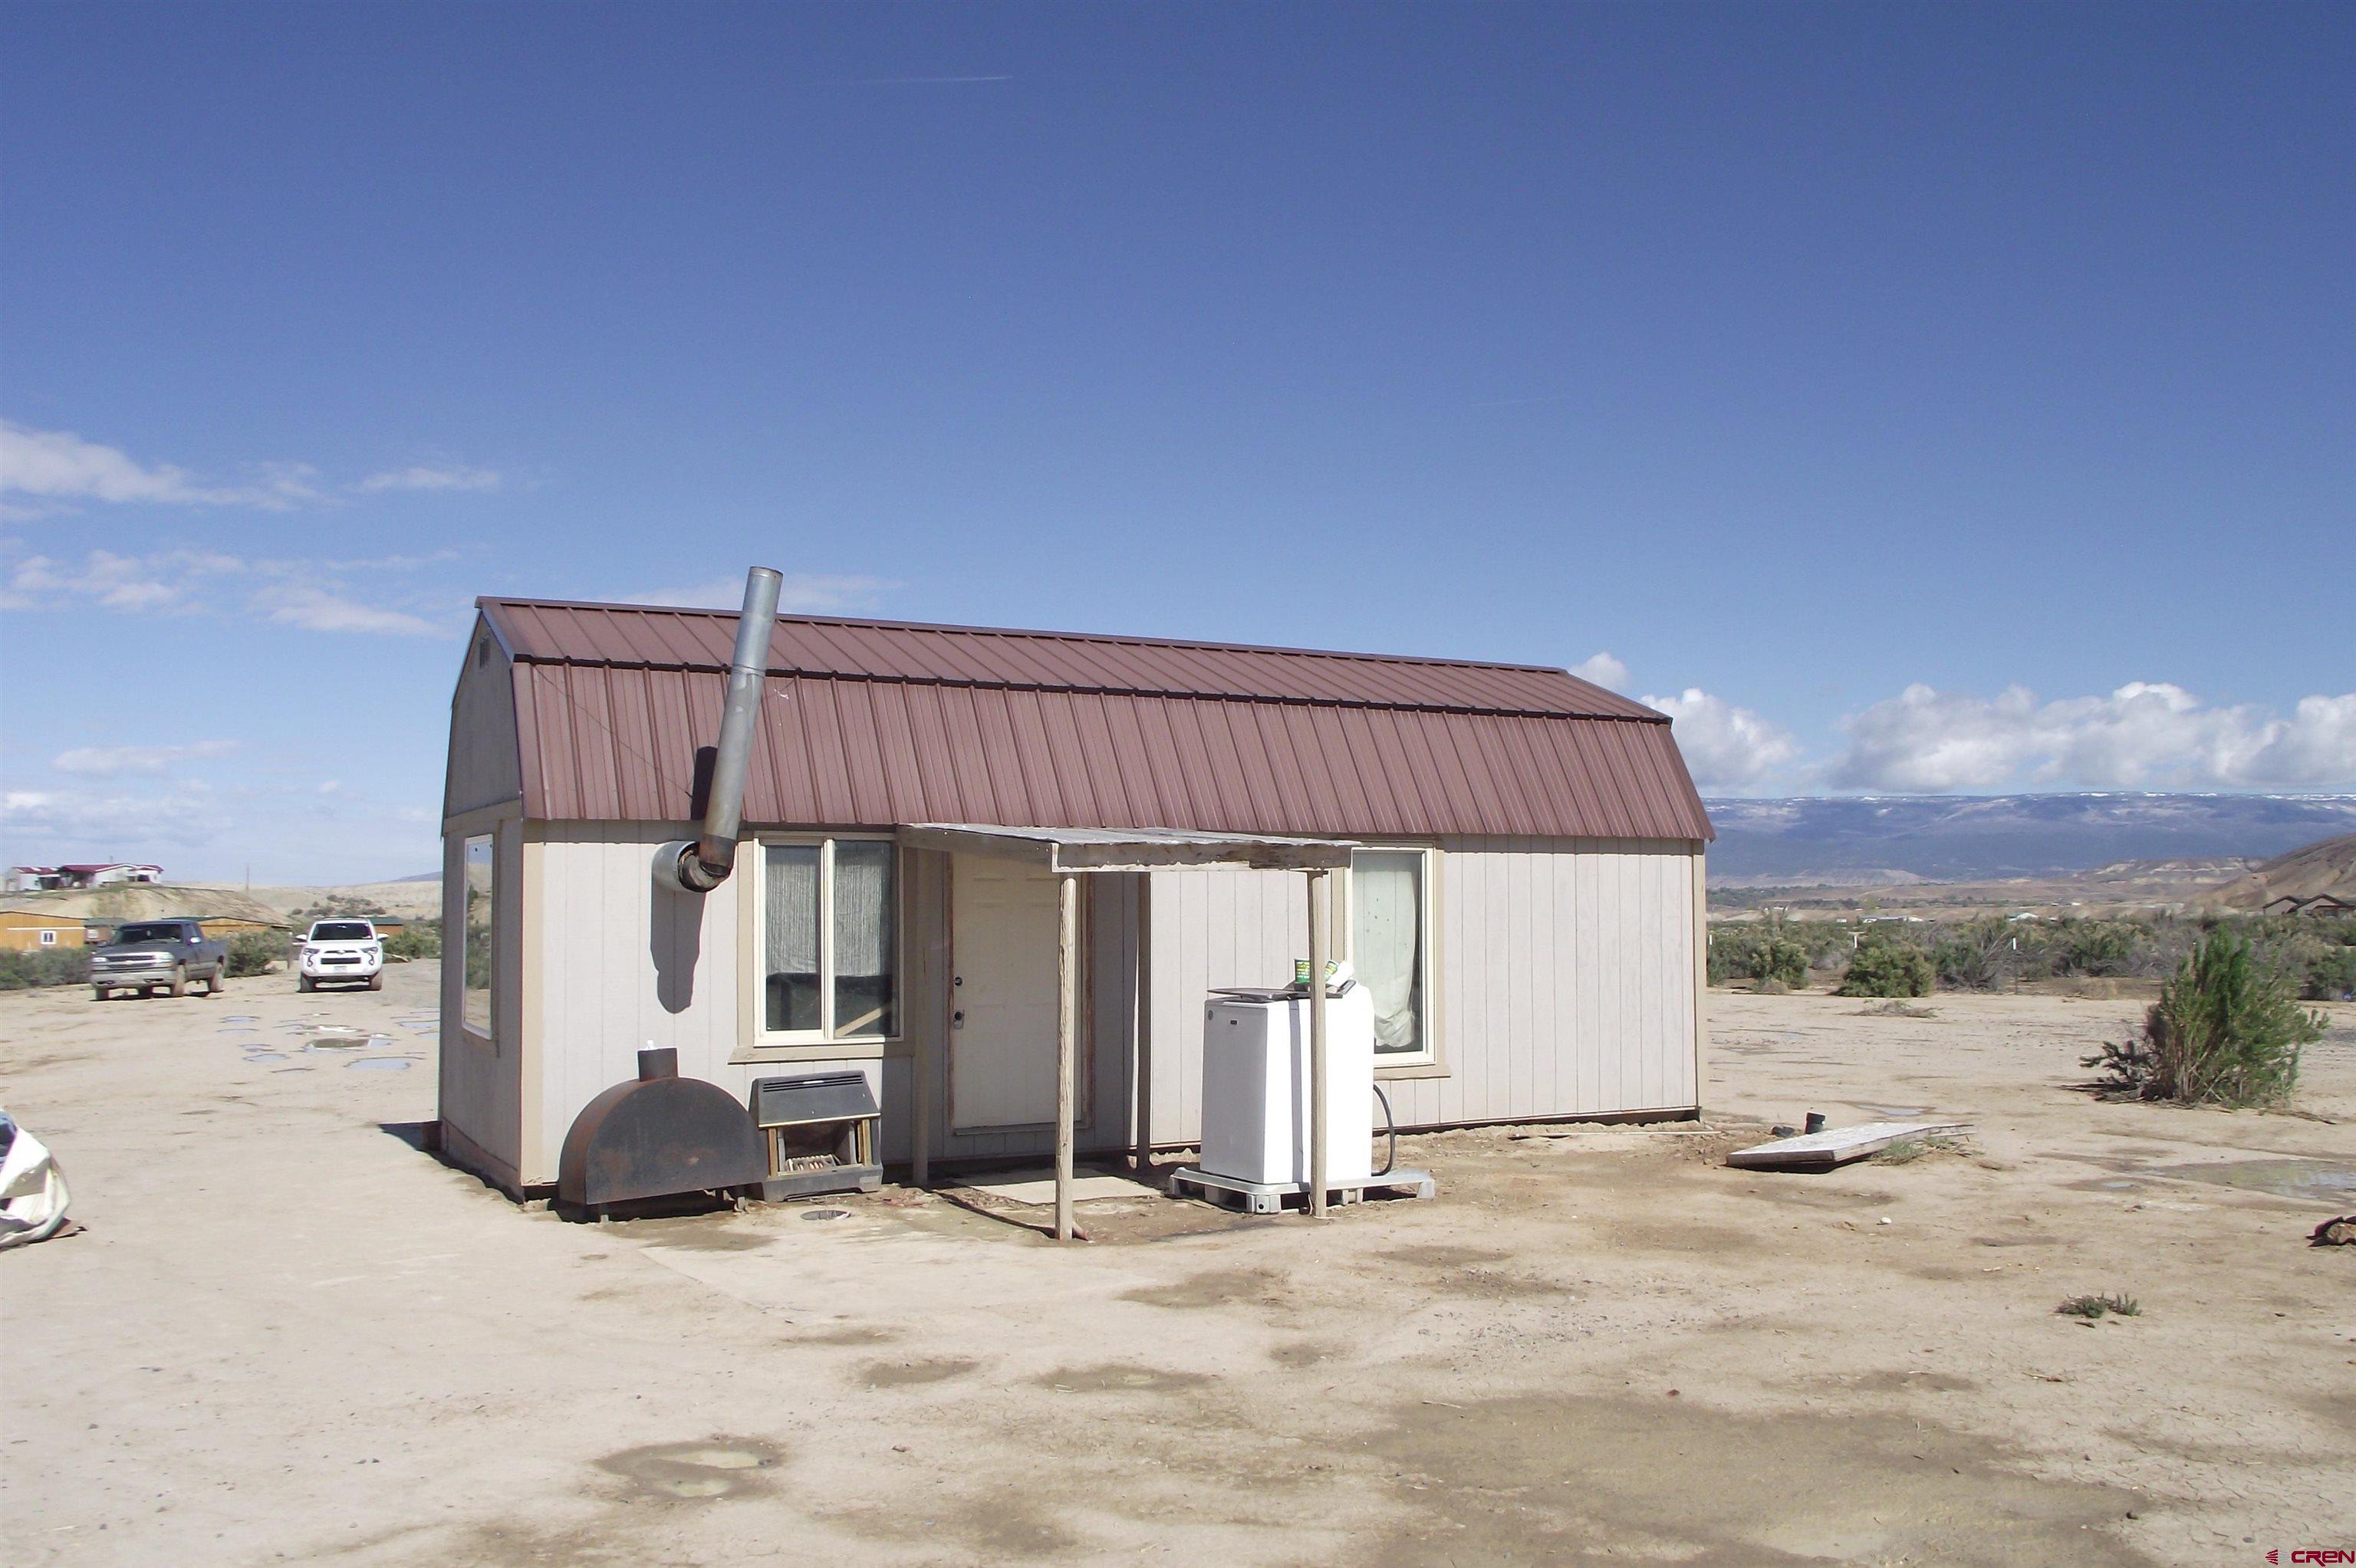 Photo of 5722 Peach Valley Rd in Delta, CO